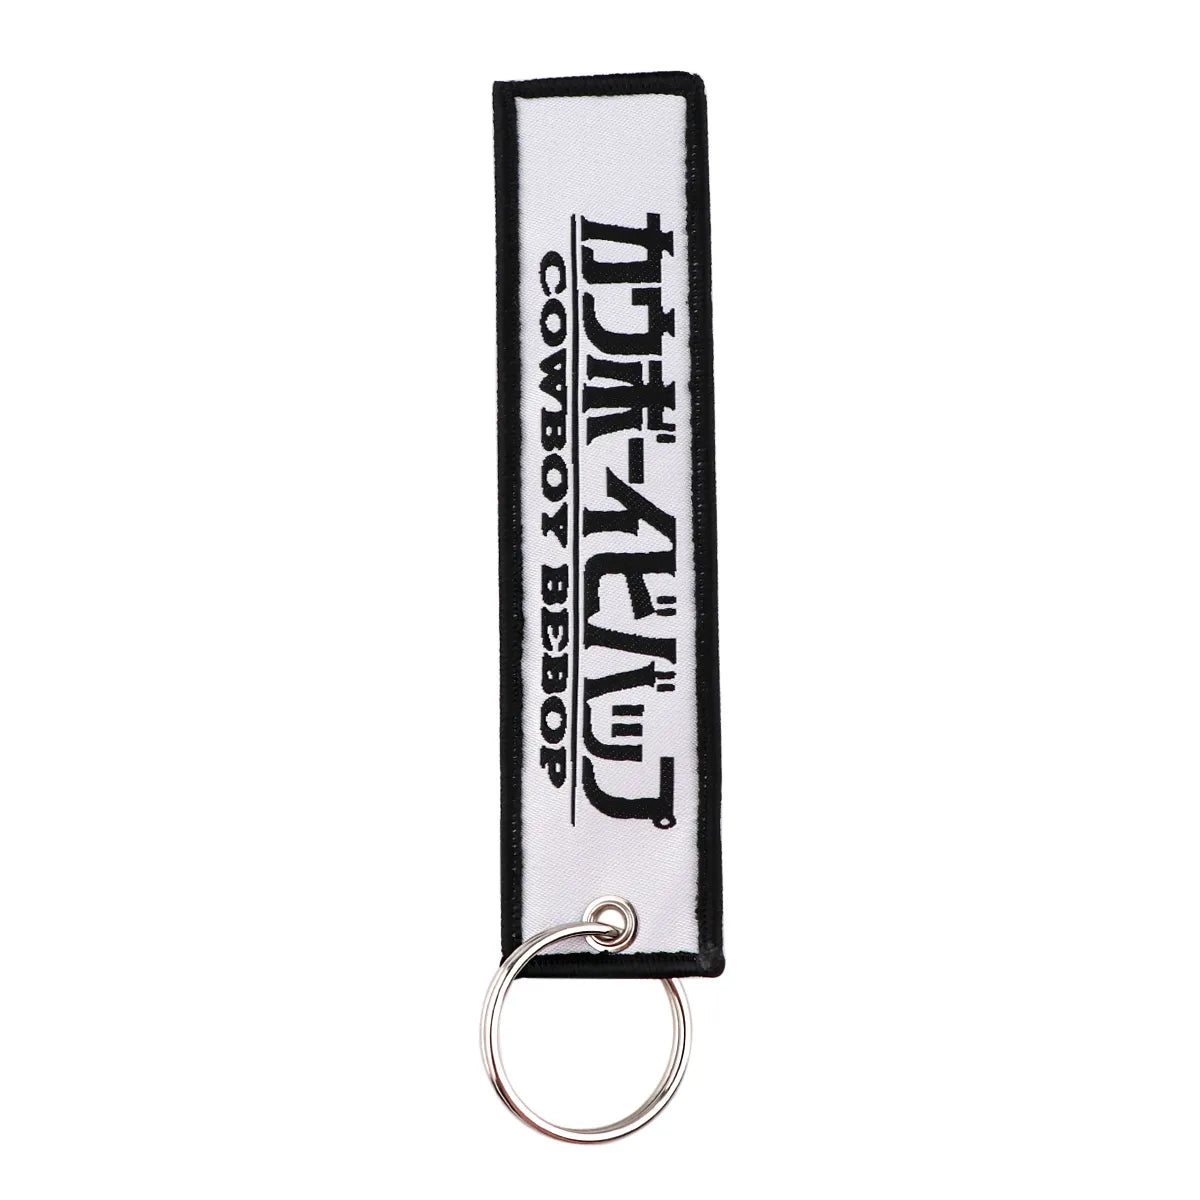 Japanese Anime Motorcycle Key Tag Keychain Collection